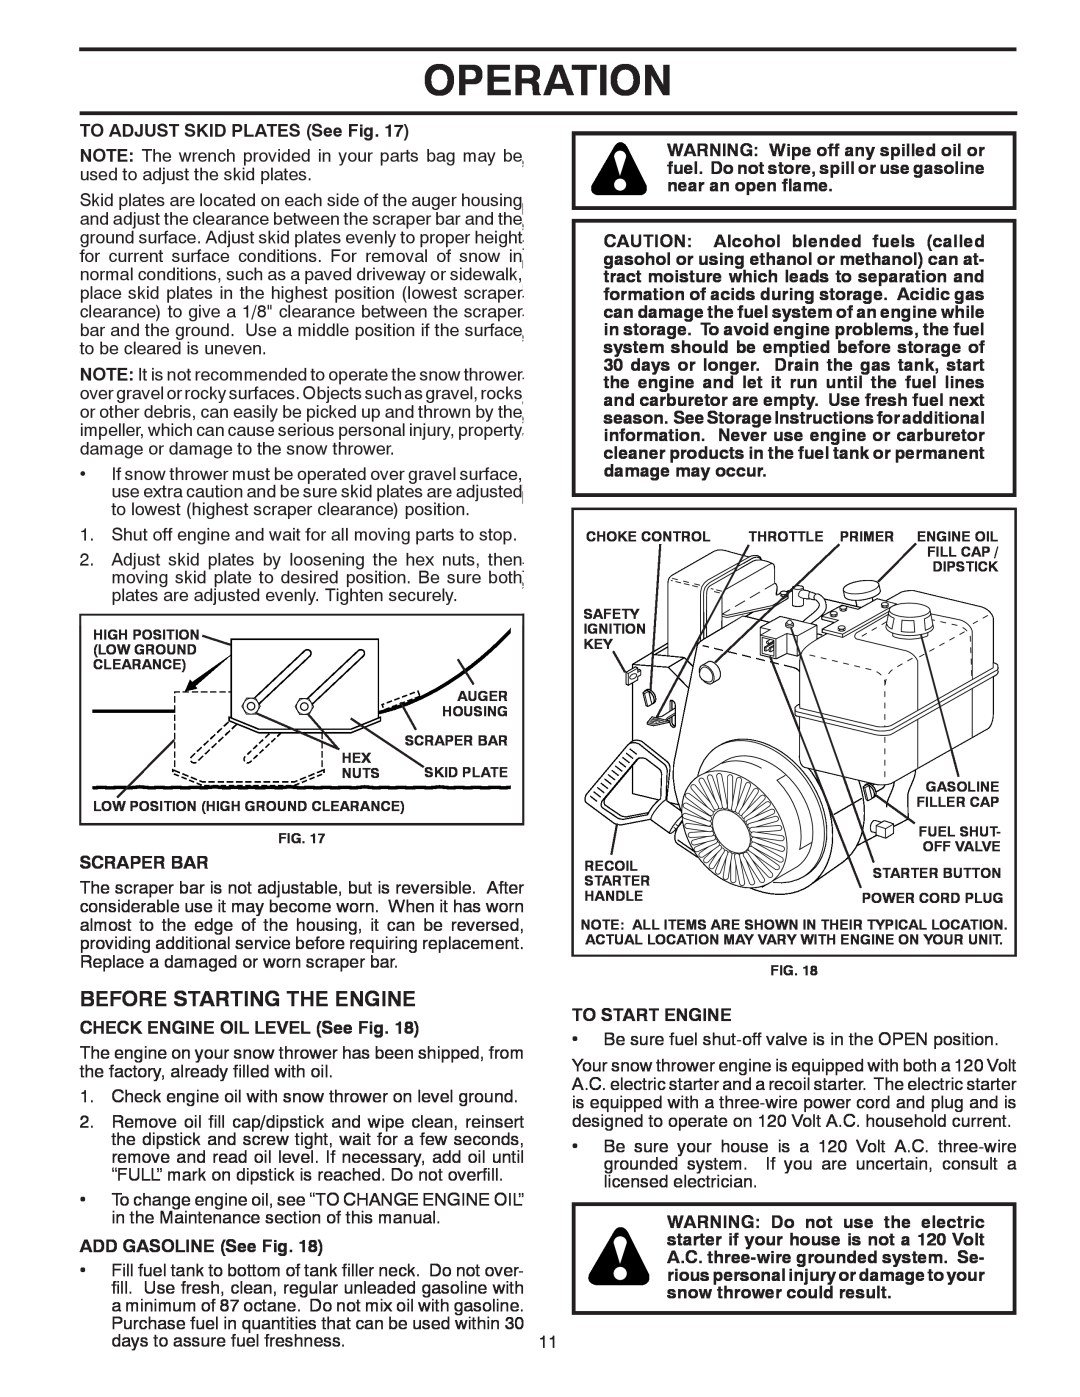 Poulan 96192001801 Operation, Before Starting The Engine, TO ADJUST SKID PLATES See Fig, Scraper Bar, ADD GASOLINE See Fig 